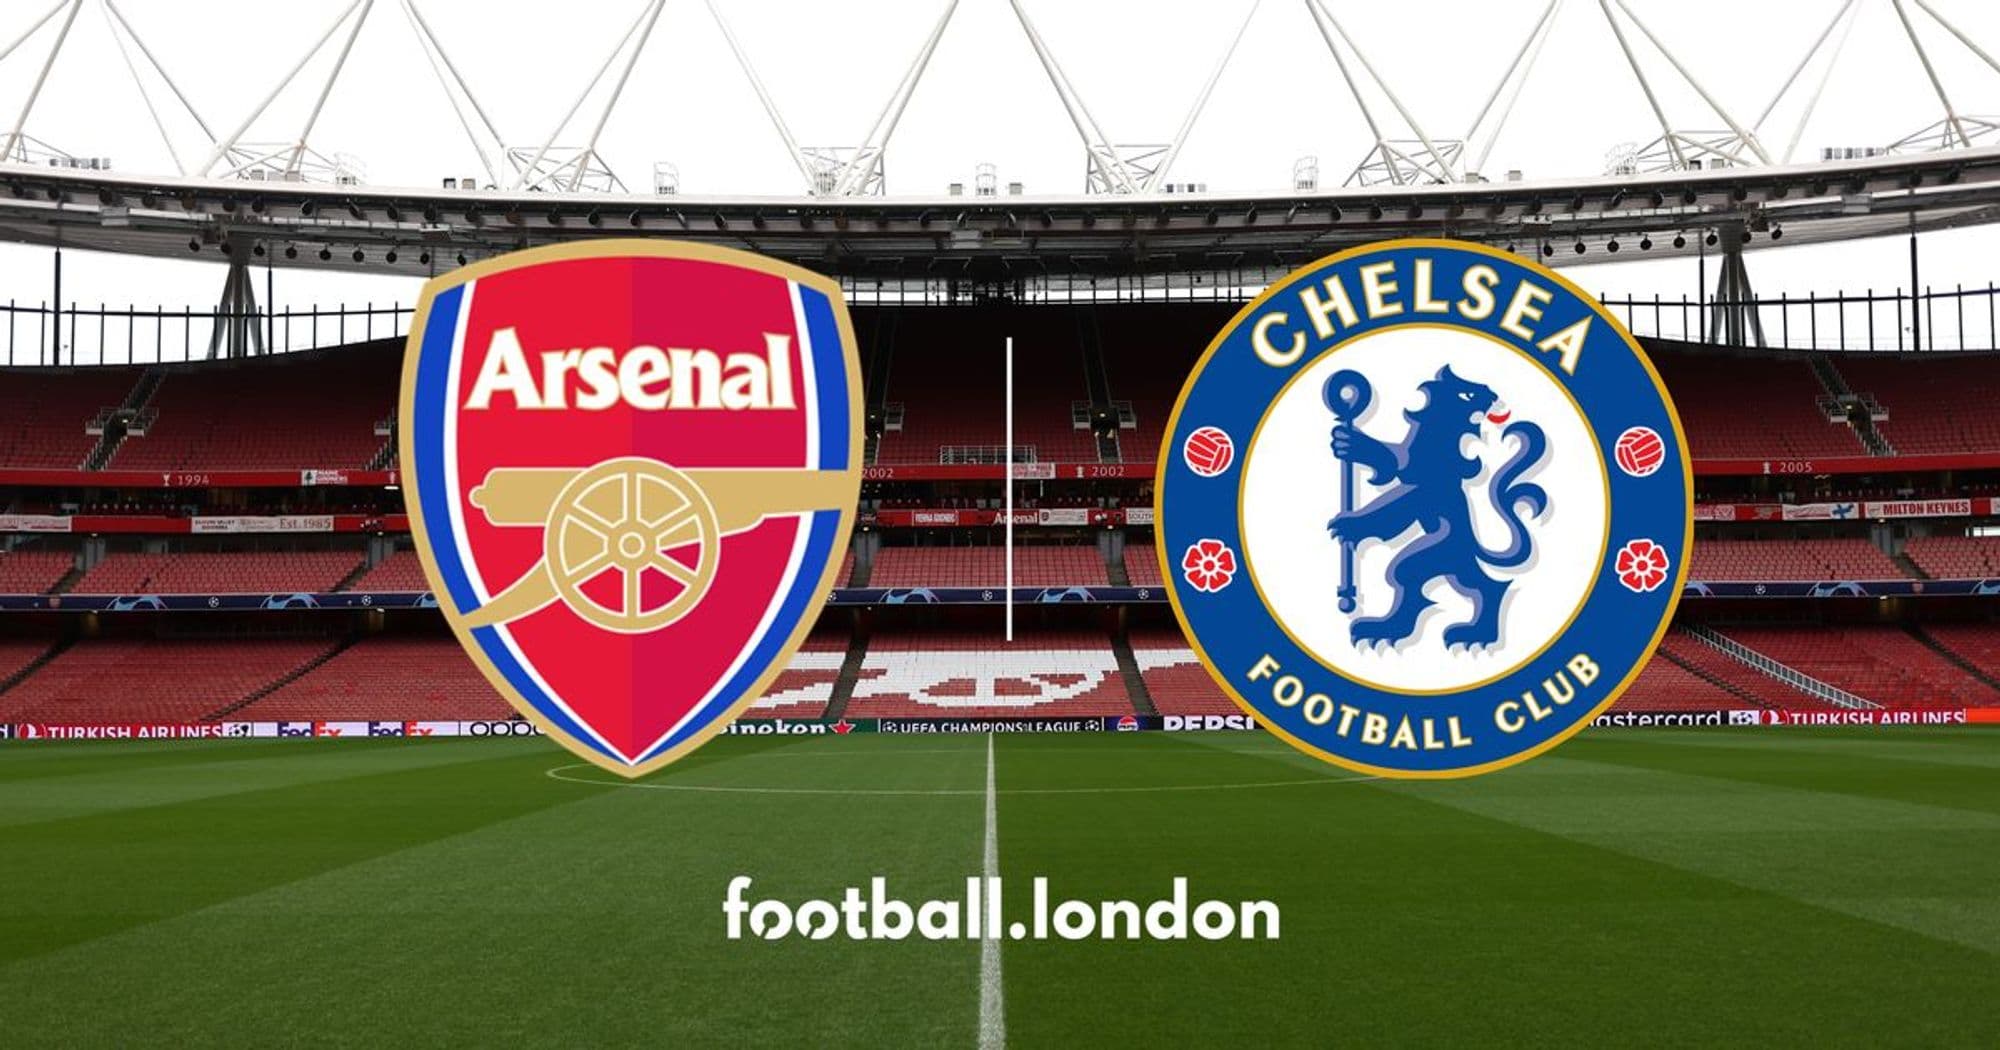 # Arsenal Dominates Chelsea in a Record Victory